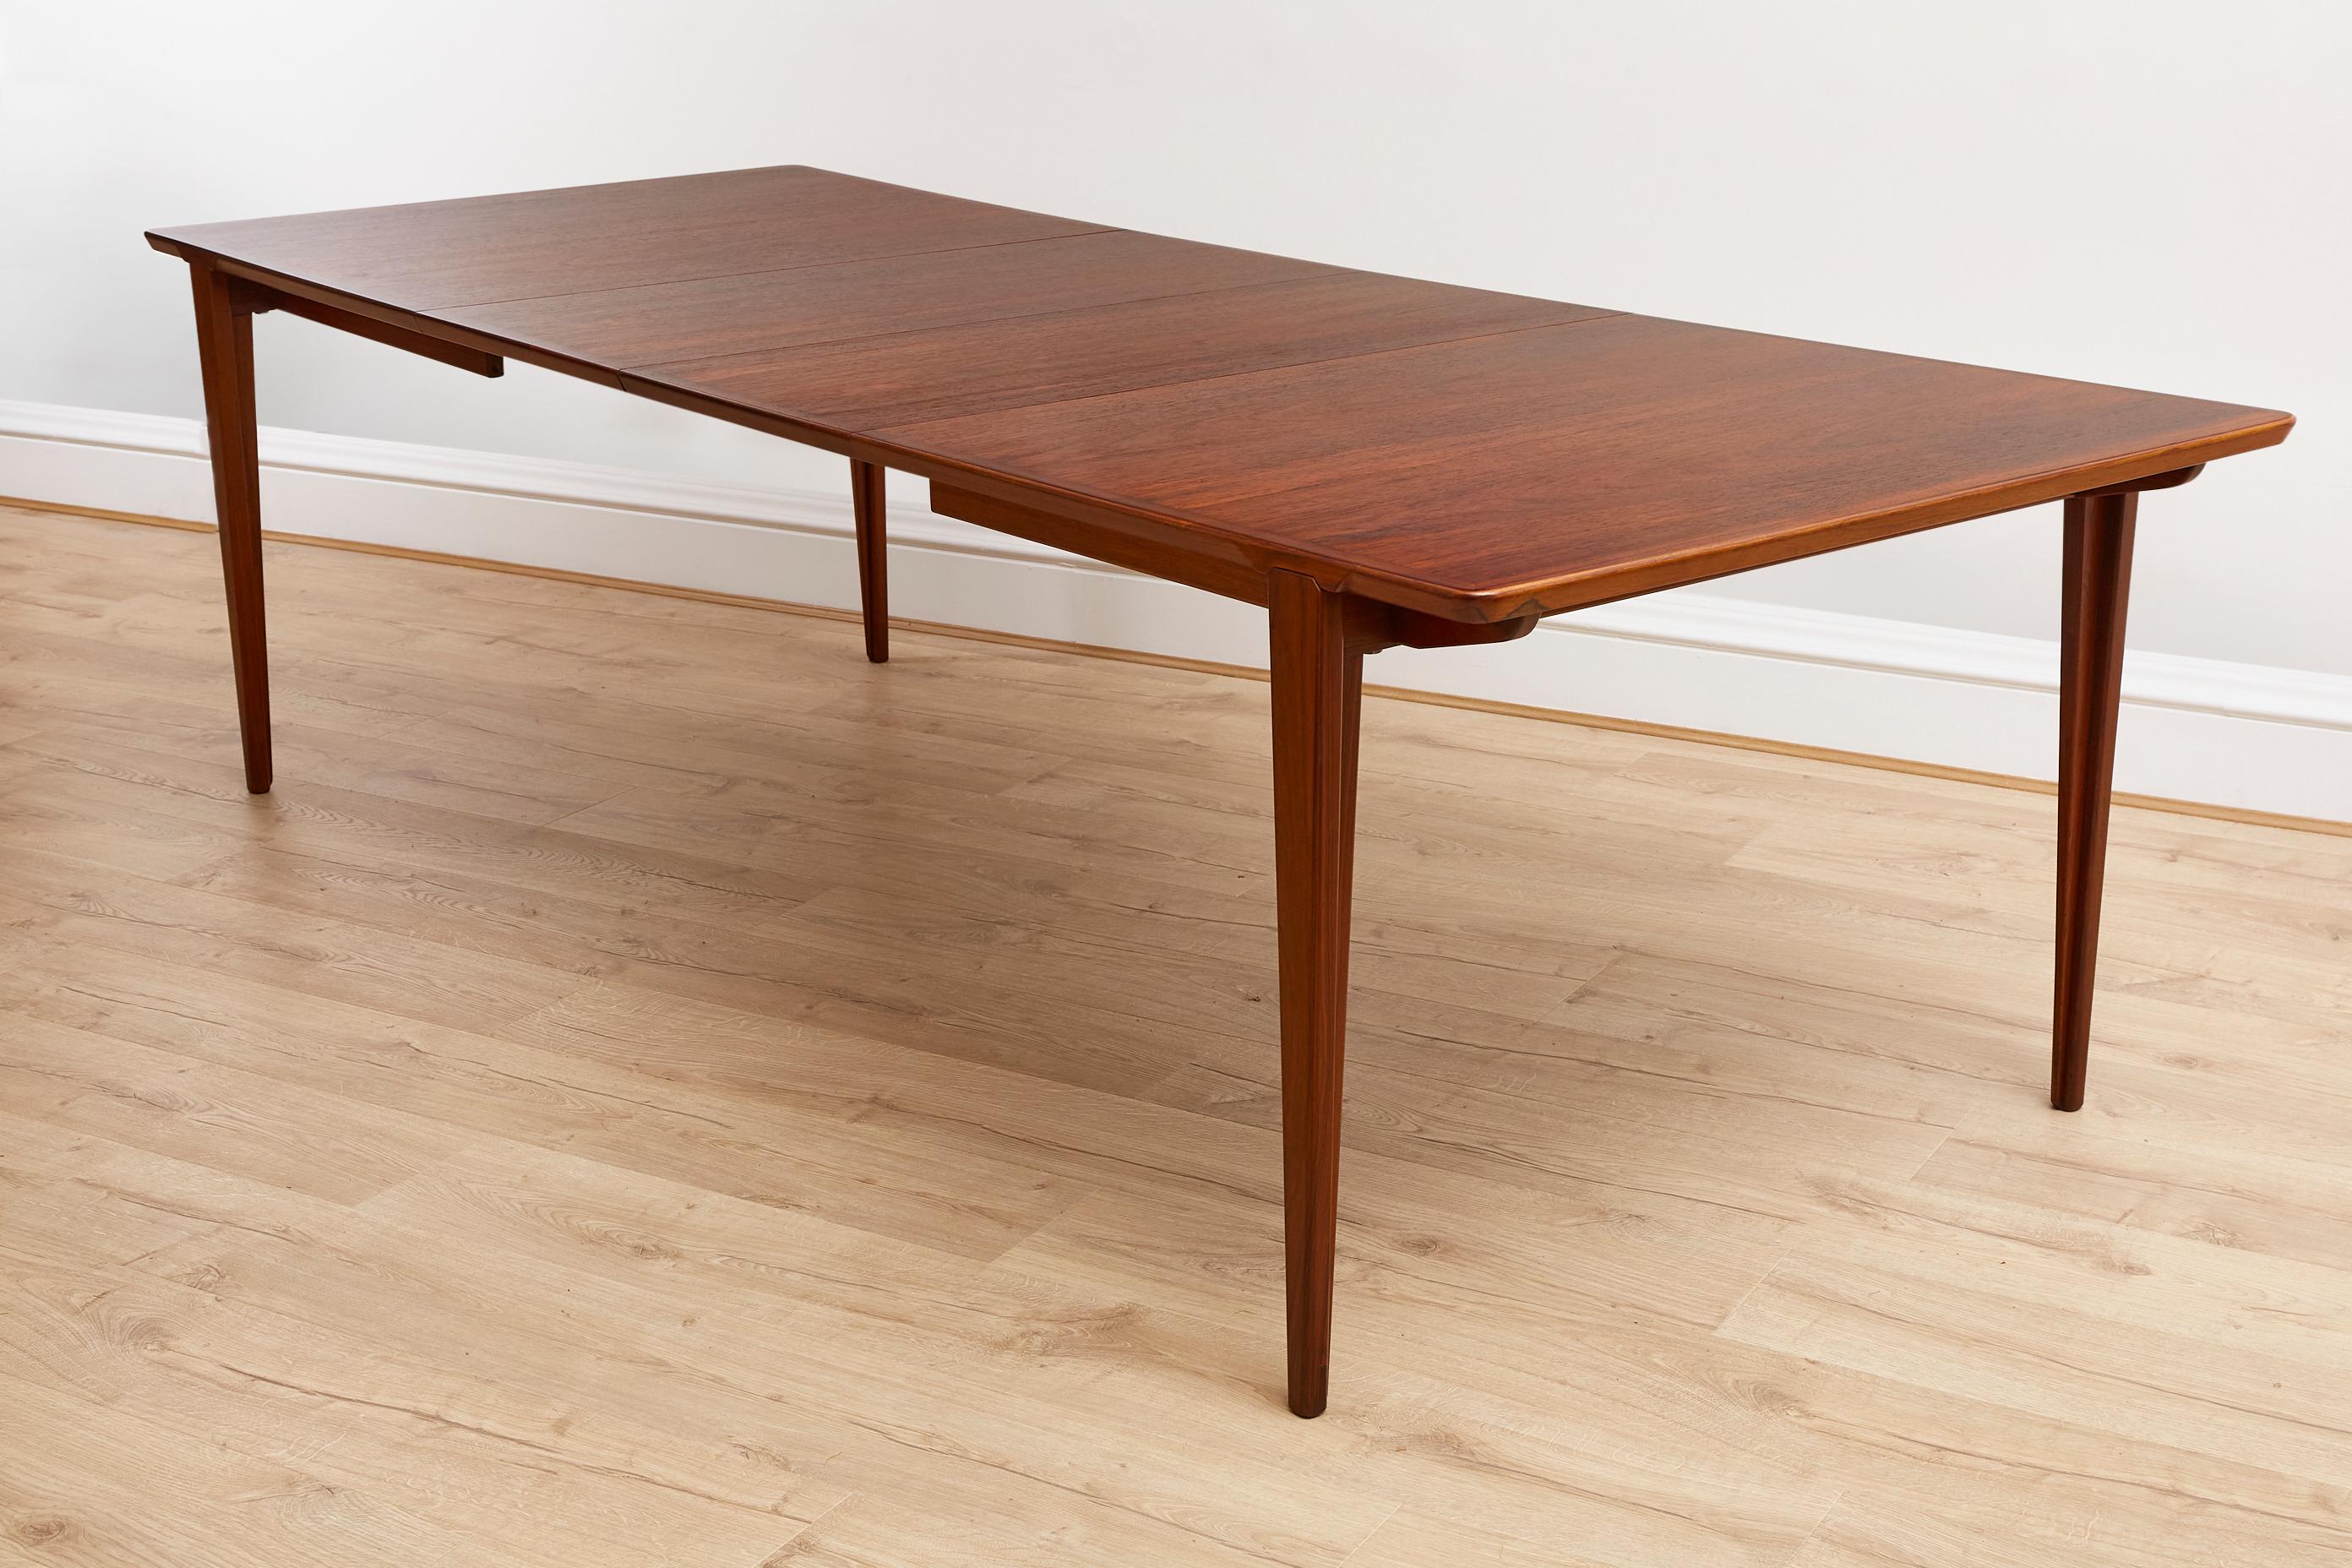 n exceptional rosewood extendable dining table, a creation by the acclaimed designer Henry Rosengren Hansen for Brande Mobelindustri in the 1960's.

Crafted from the finest rosewood, this dining table boasts a captivating grain and rich hues that